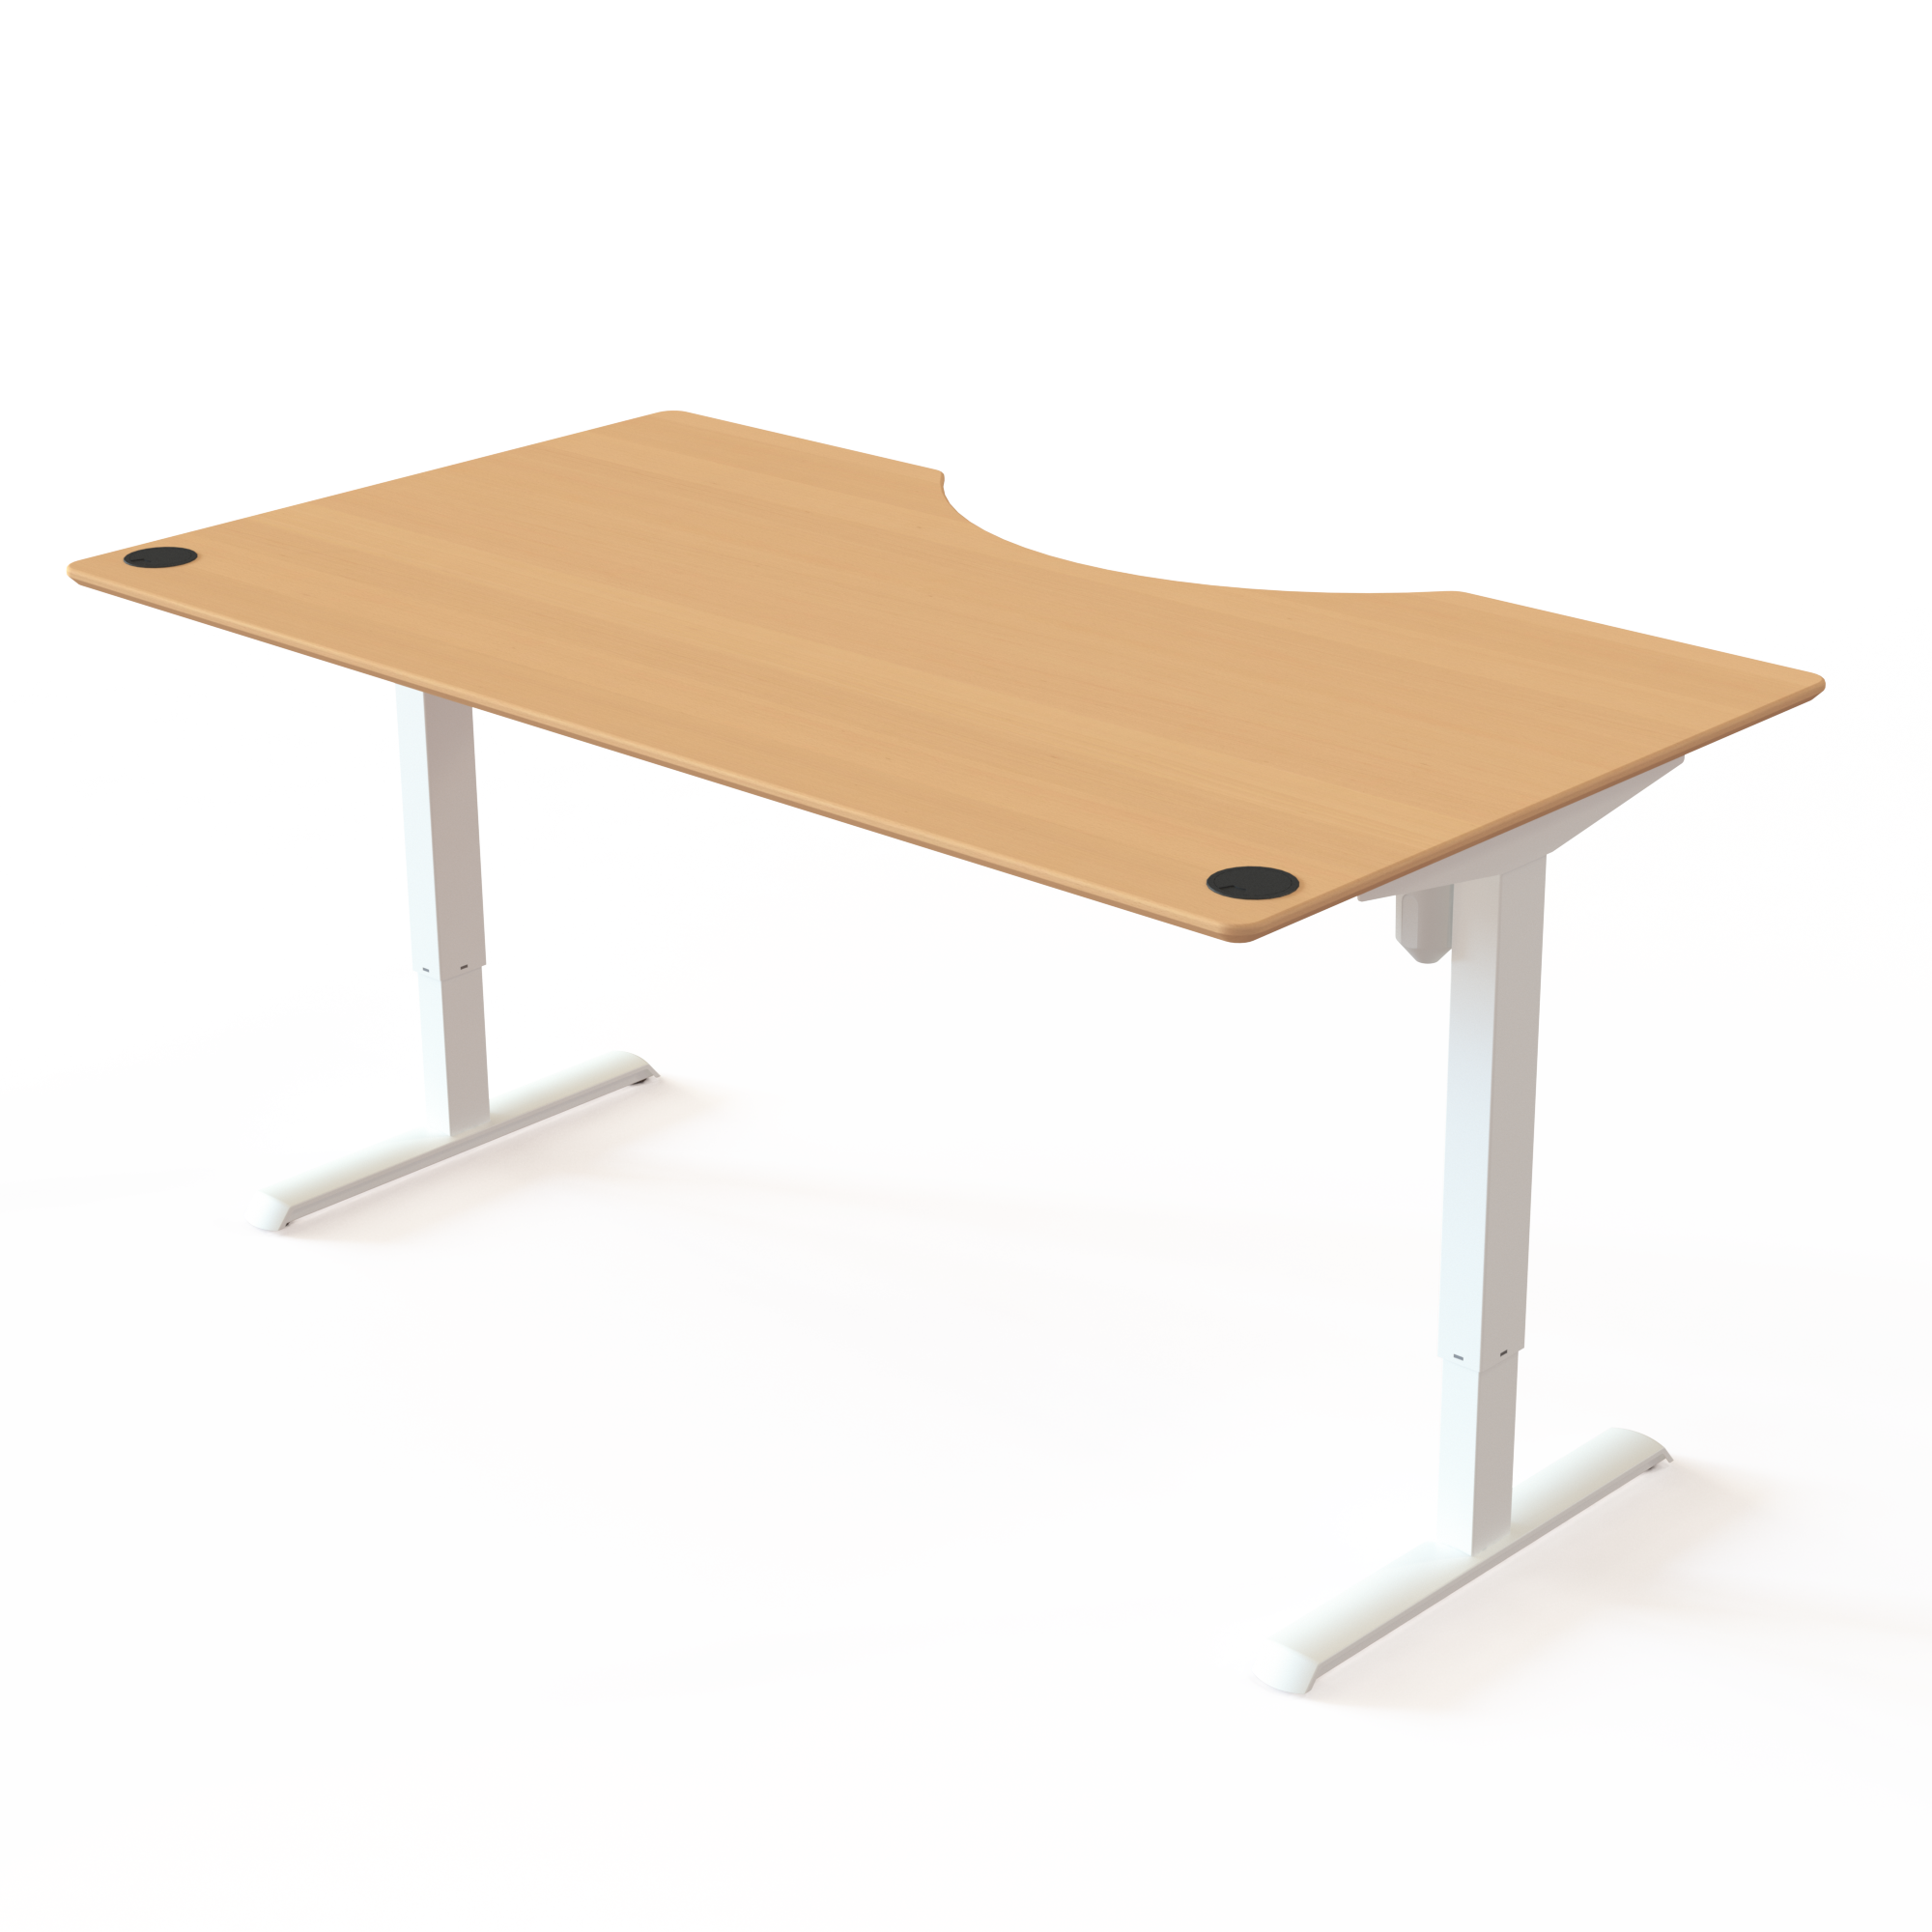 Electric Adjustable Desk | 180x100 cm | Beech with white frame